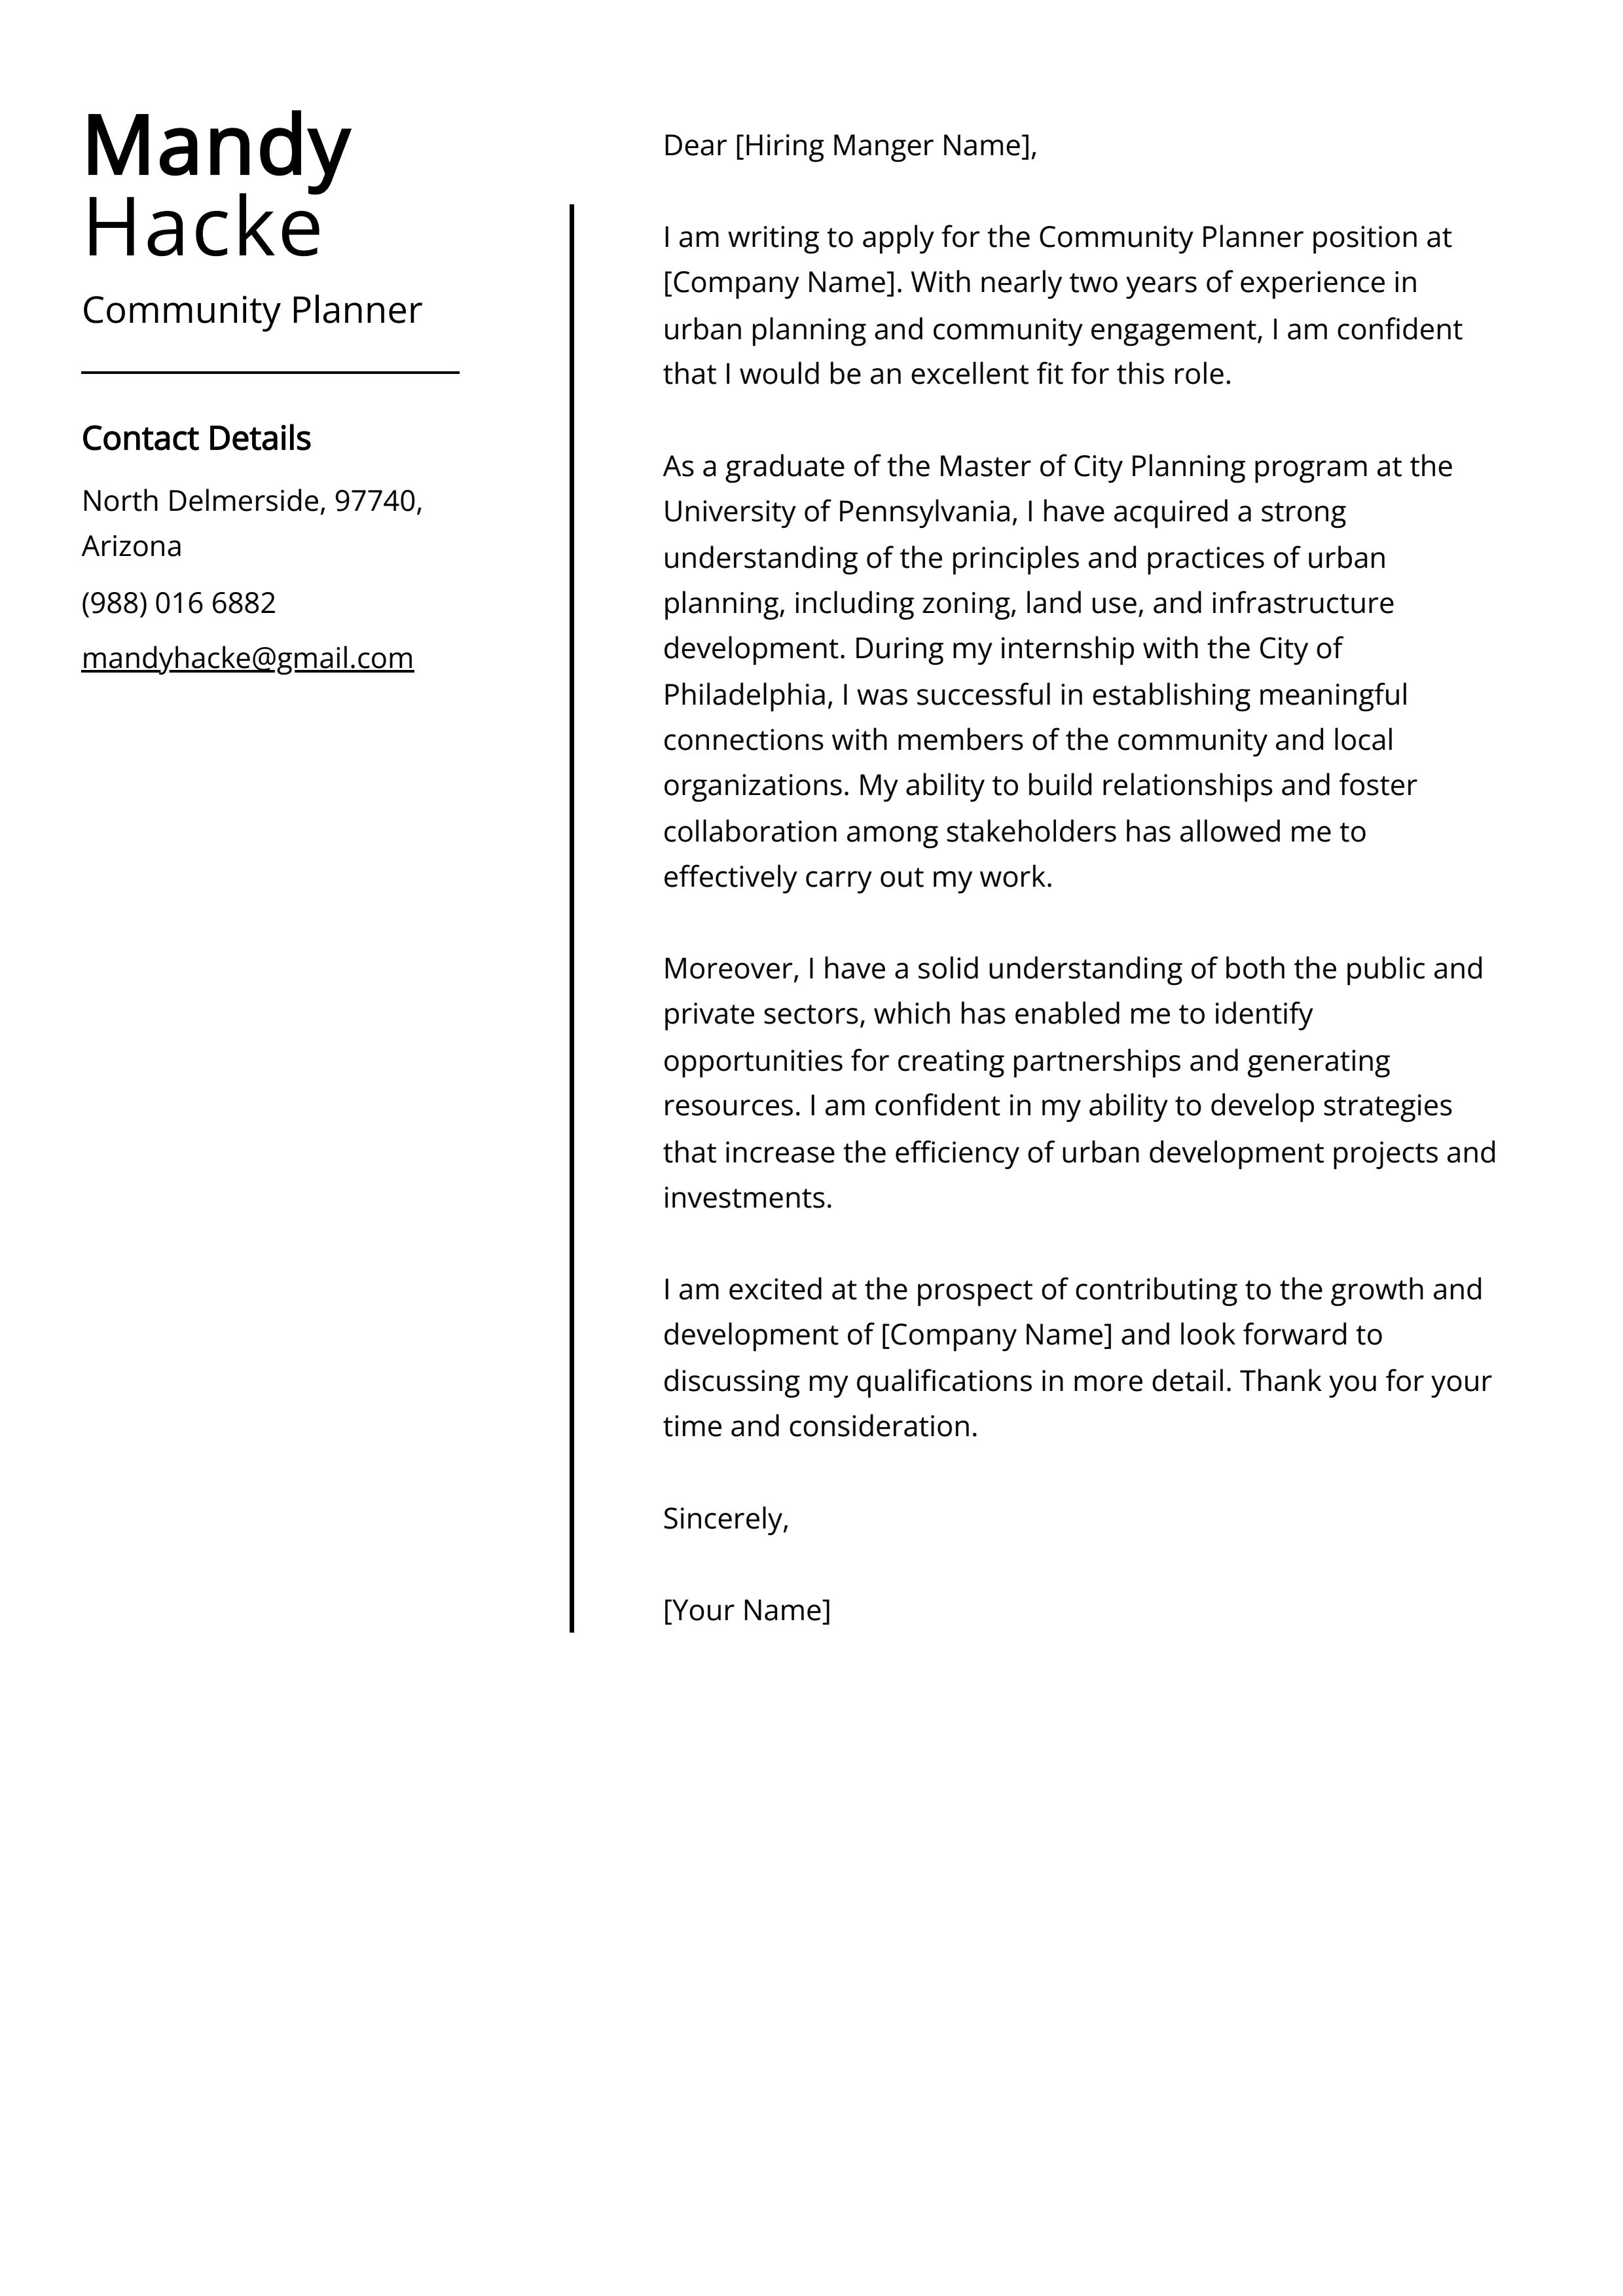 Community Planner Cover Letter Example